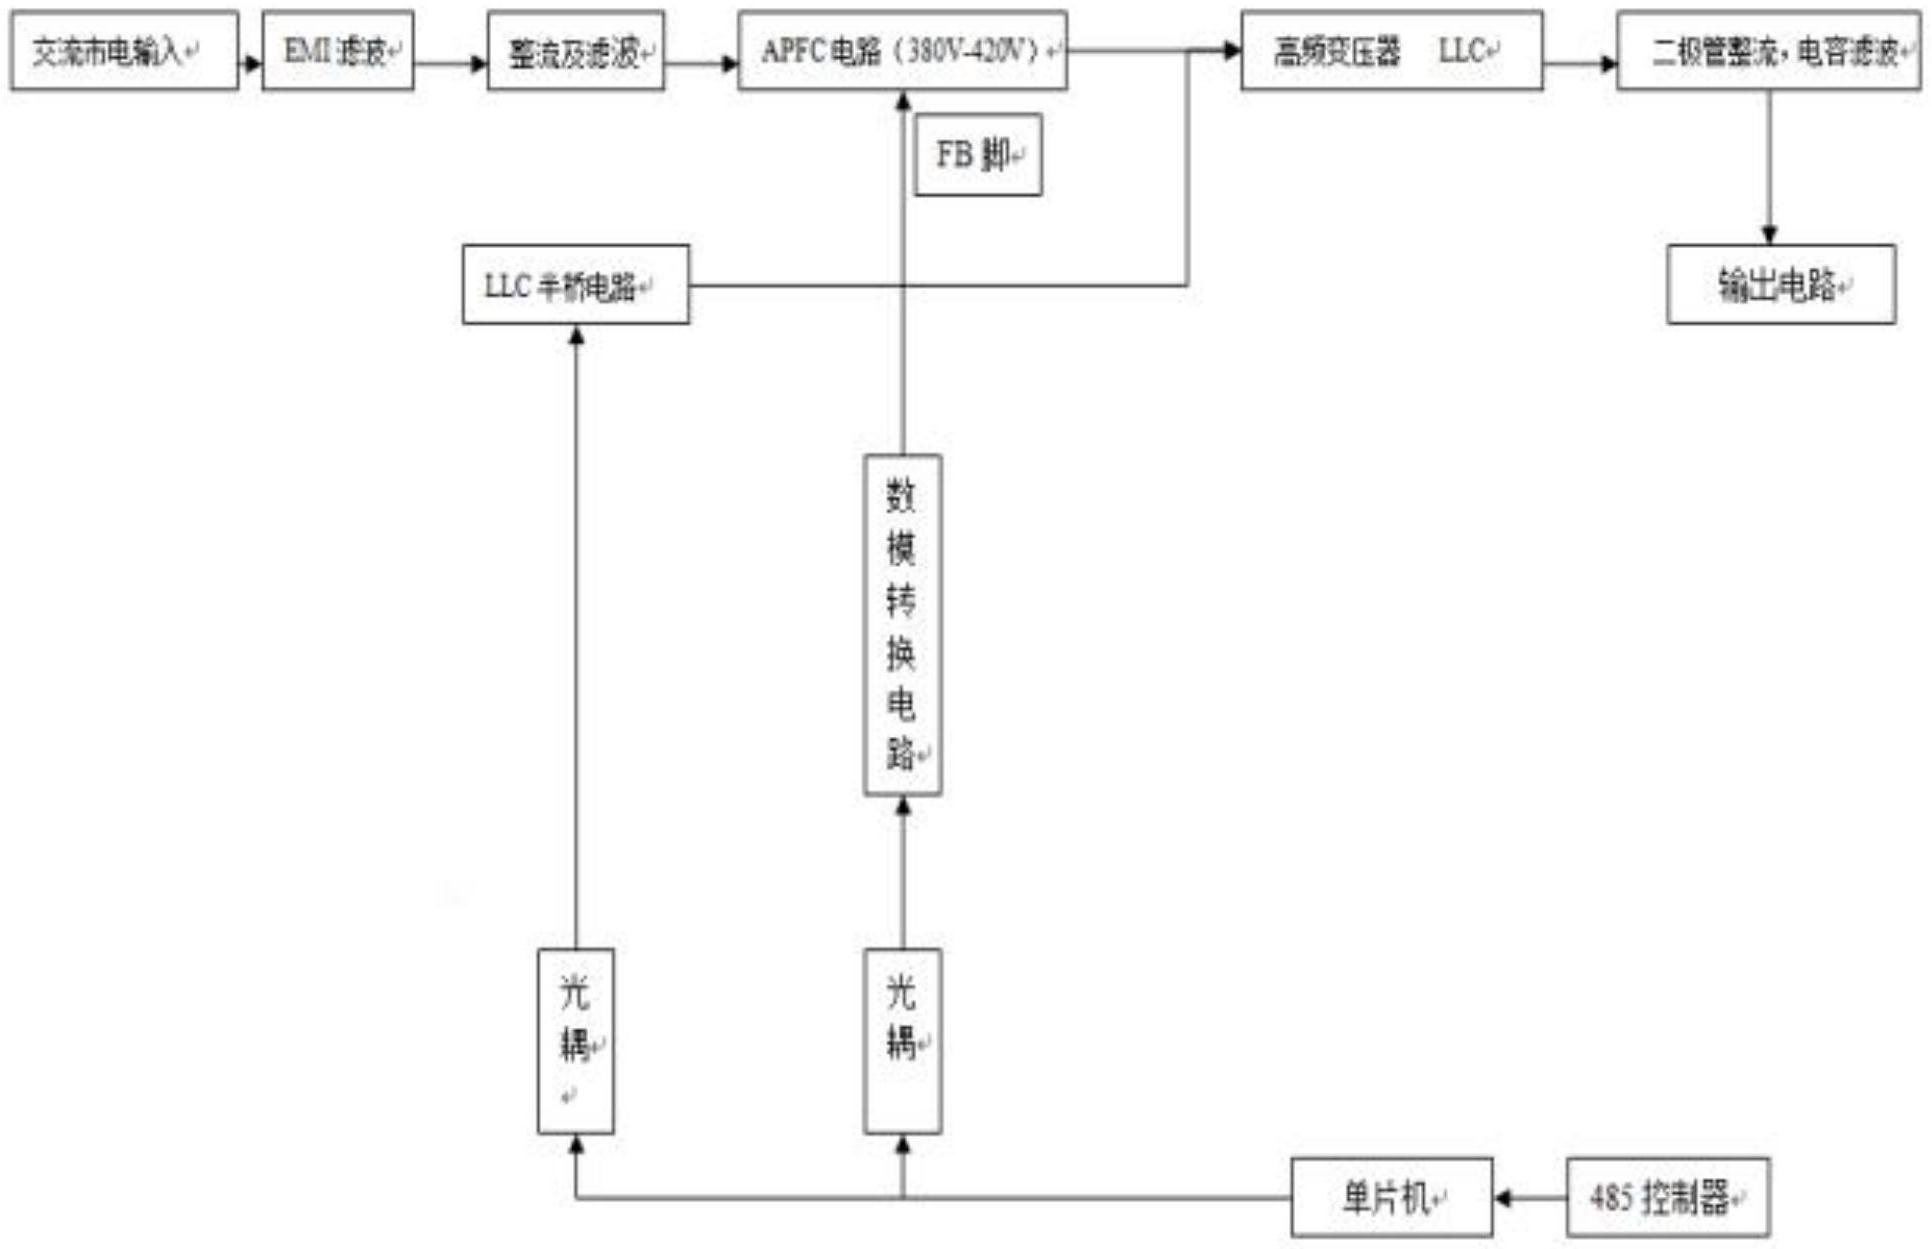 Anbao Technology has been granted a patent for a digital high-power charger efficiency improvement circuit